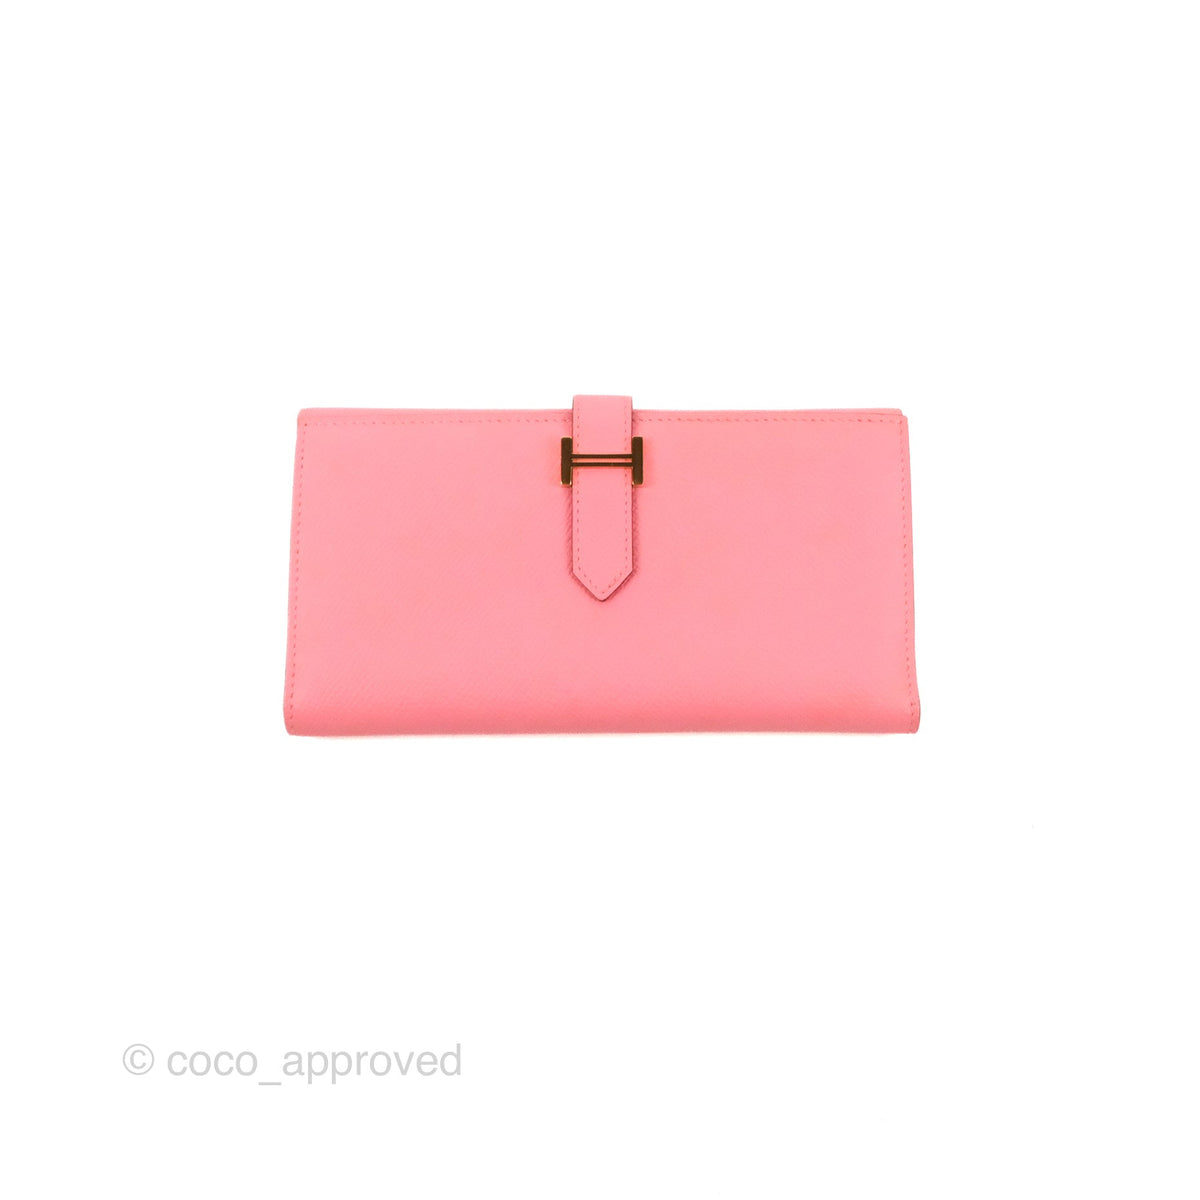 Hermes Rose Confetti Pink Bearn Compact Card-Holder Wallet Case